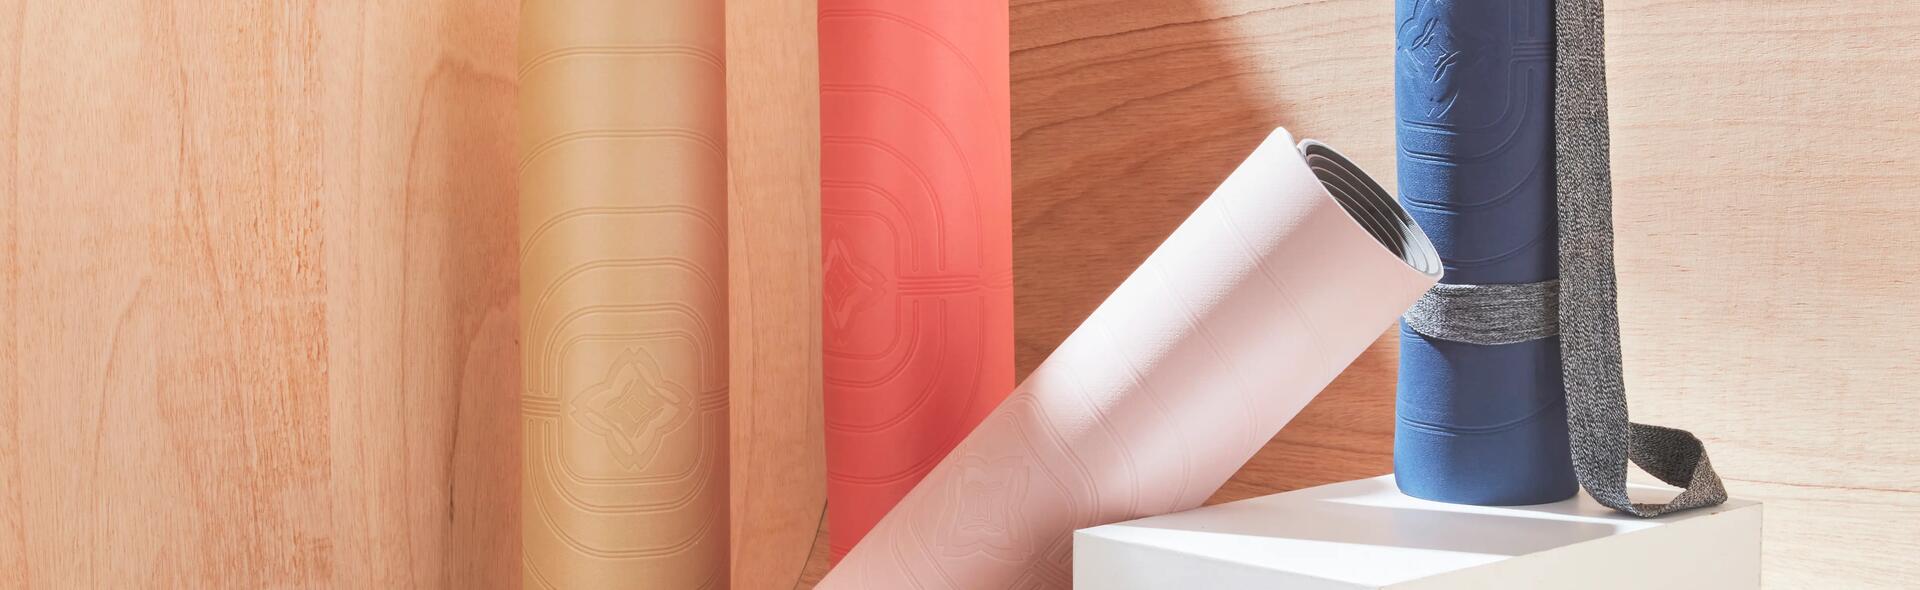 How To Clean Your Yoga Mat in a Few Simple Steps